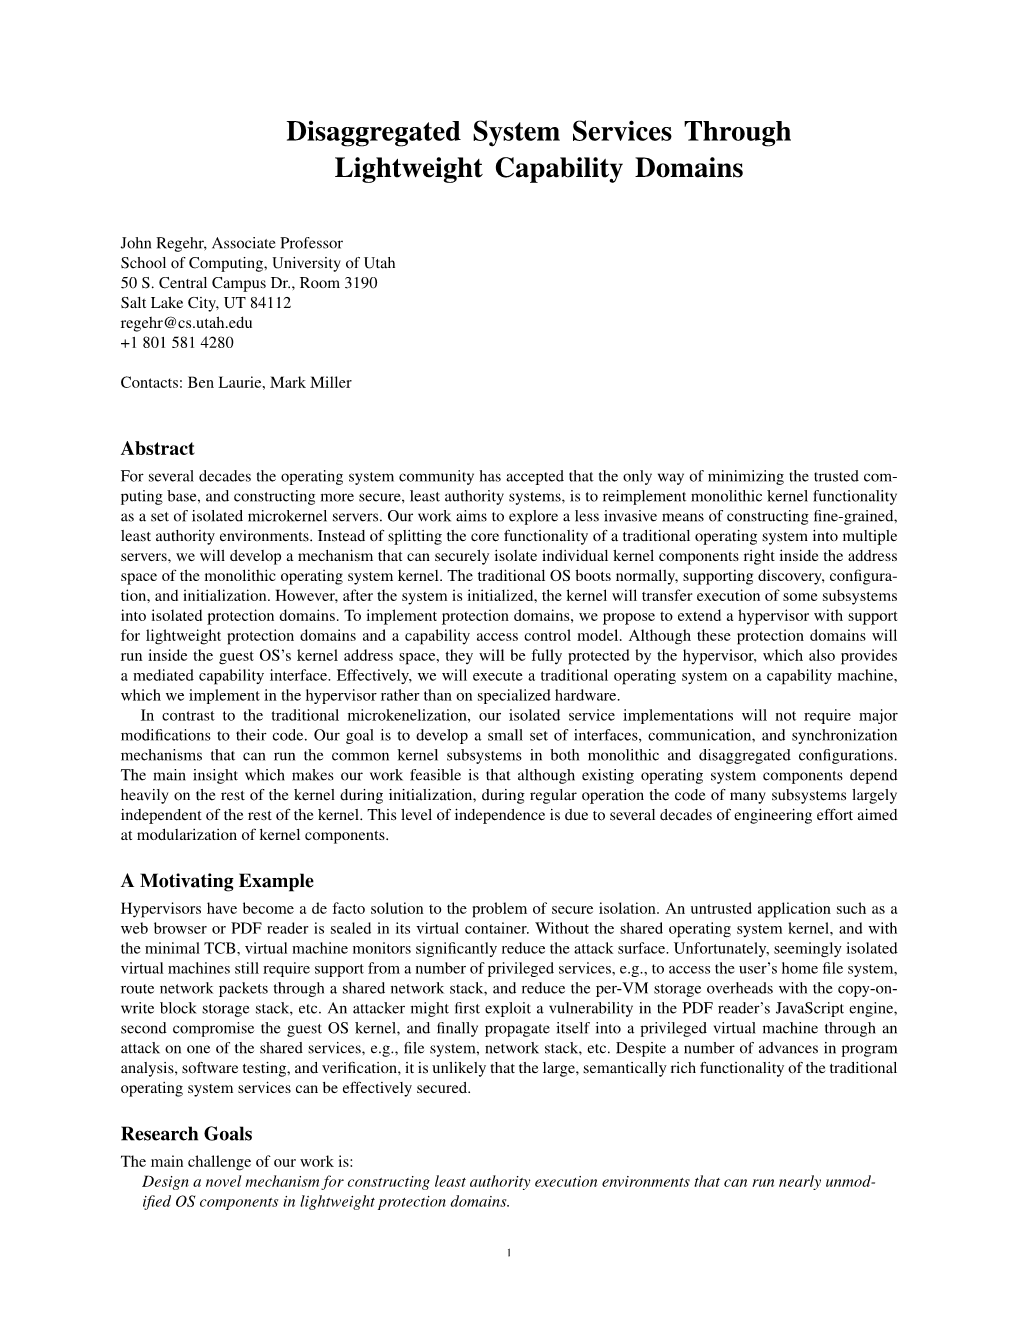 Disaggregated System Services Through Lightweight Capability Domains